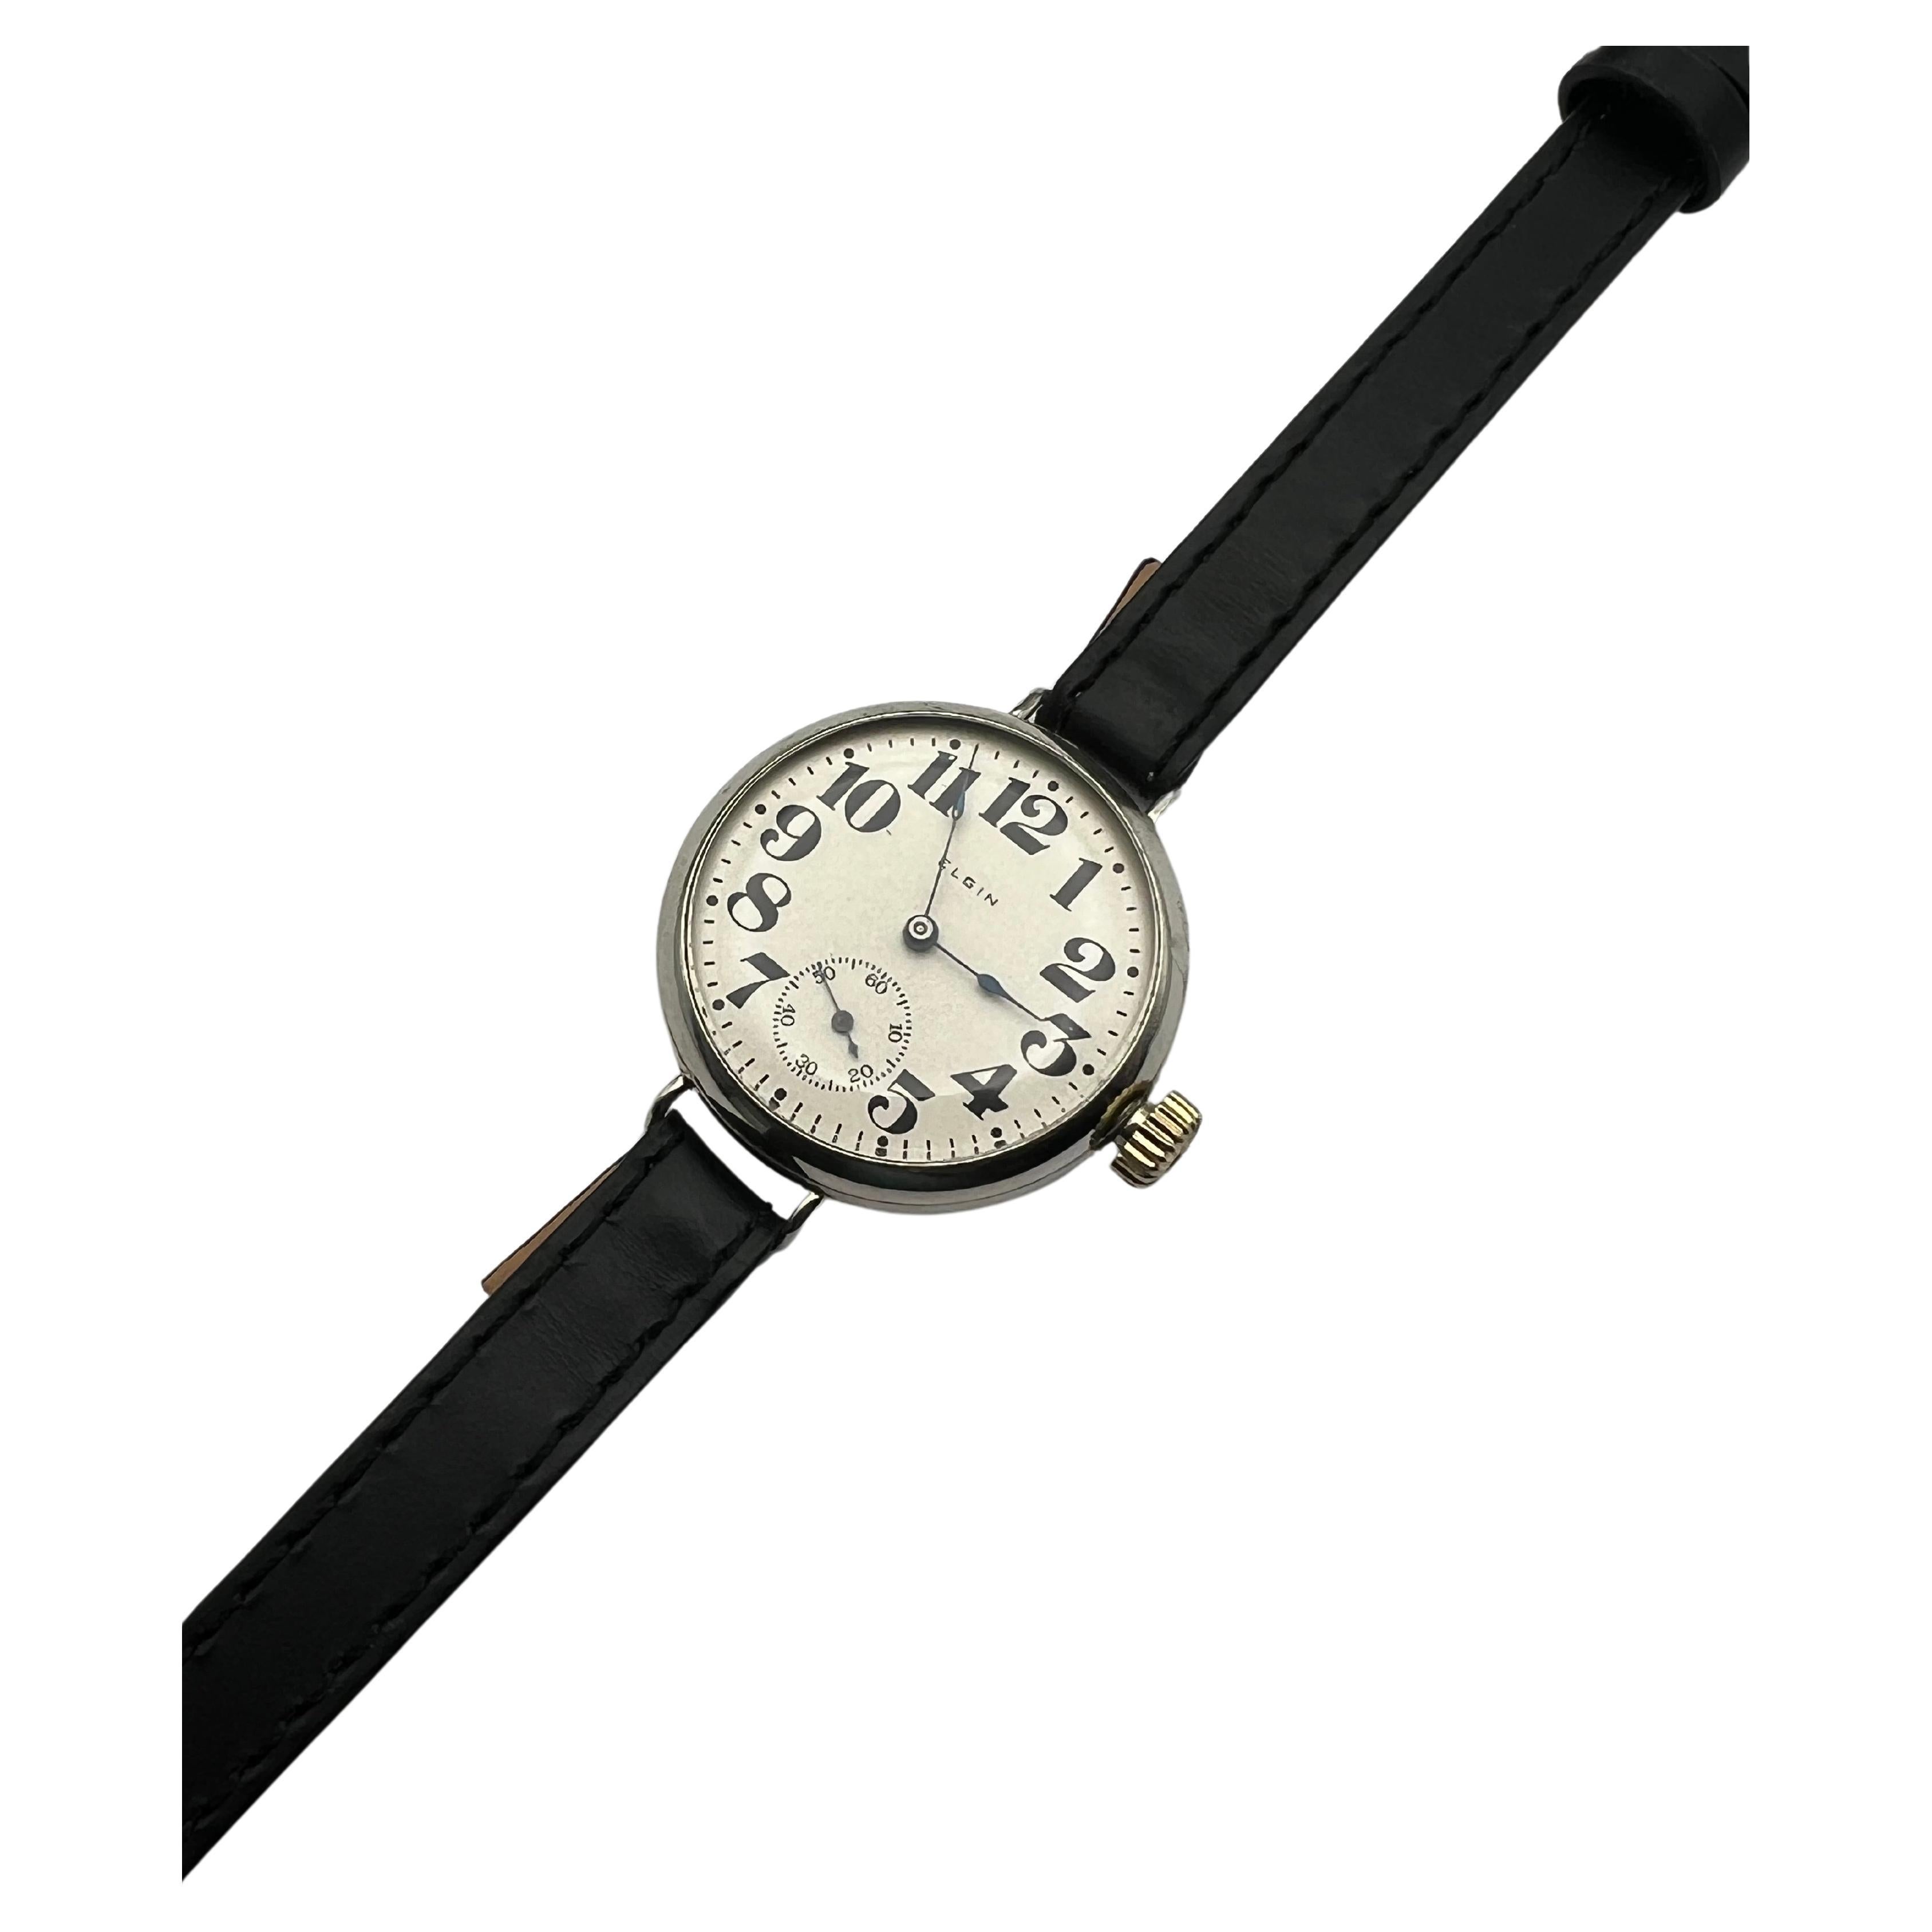 How do I change the battery in a Vivienne Westwood watch?